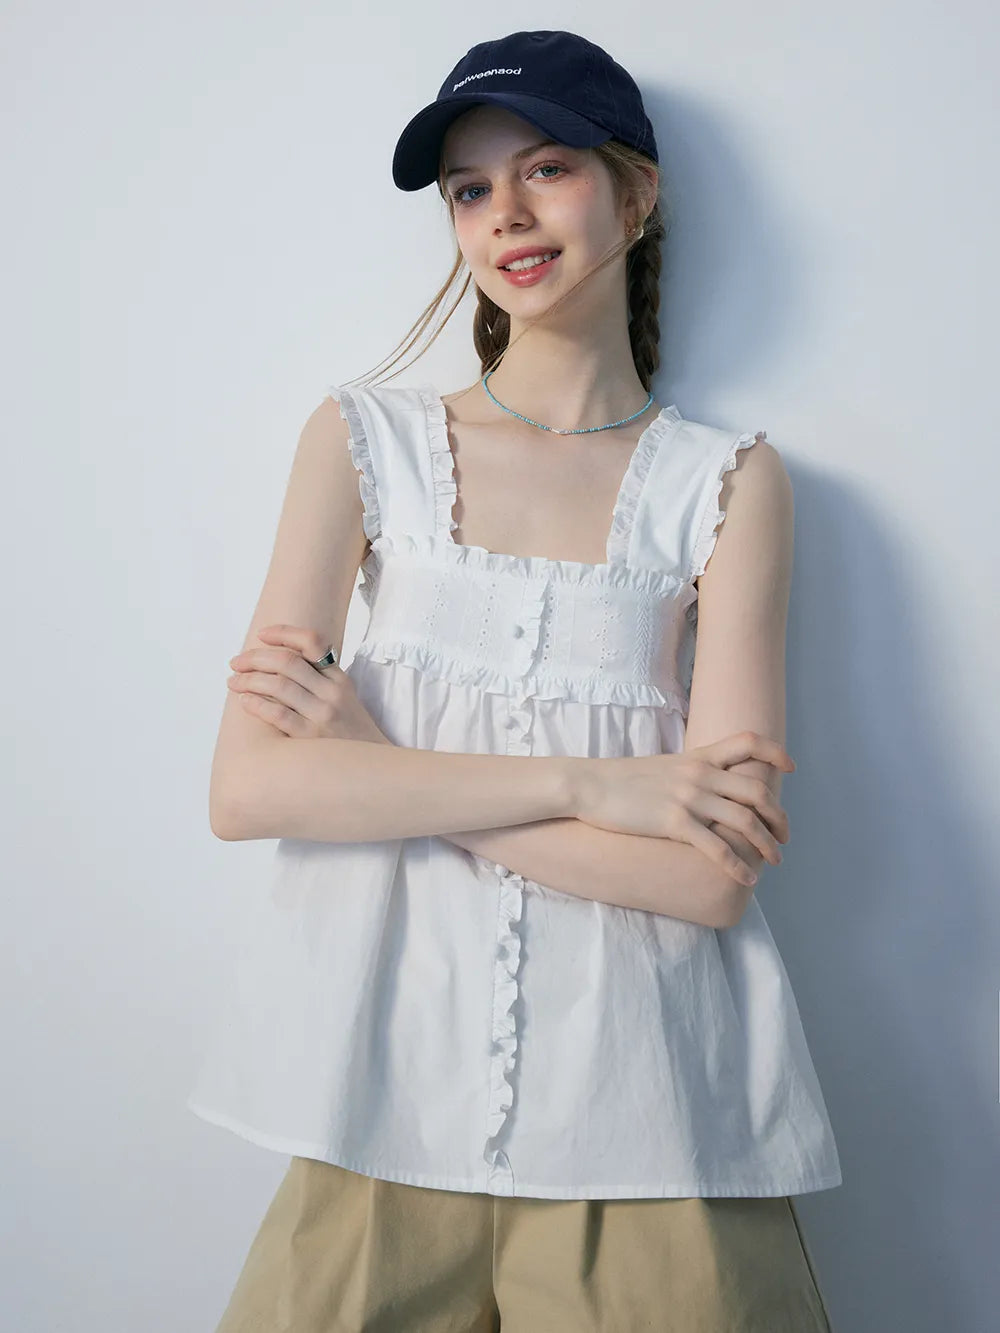 Cotton Sleeveless Blouse with Ruffle Trim and Eyelet Embroidery